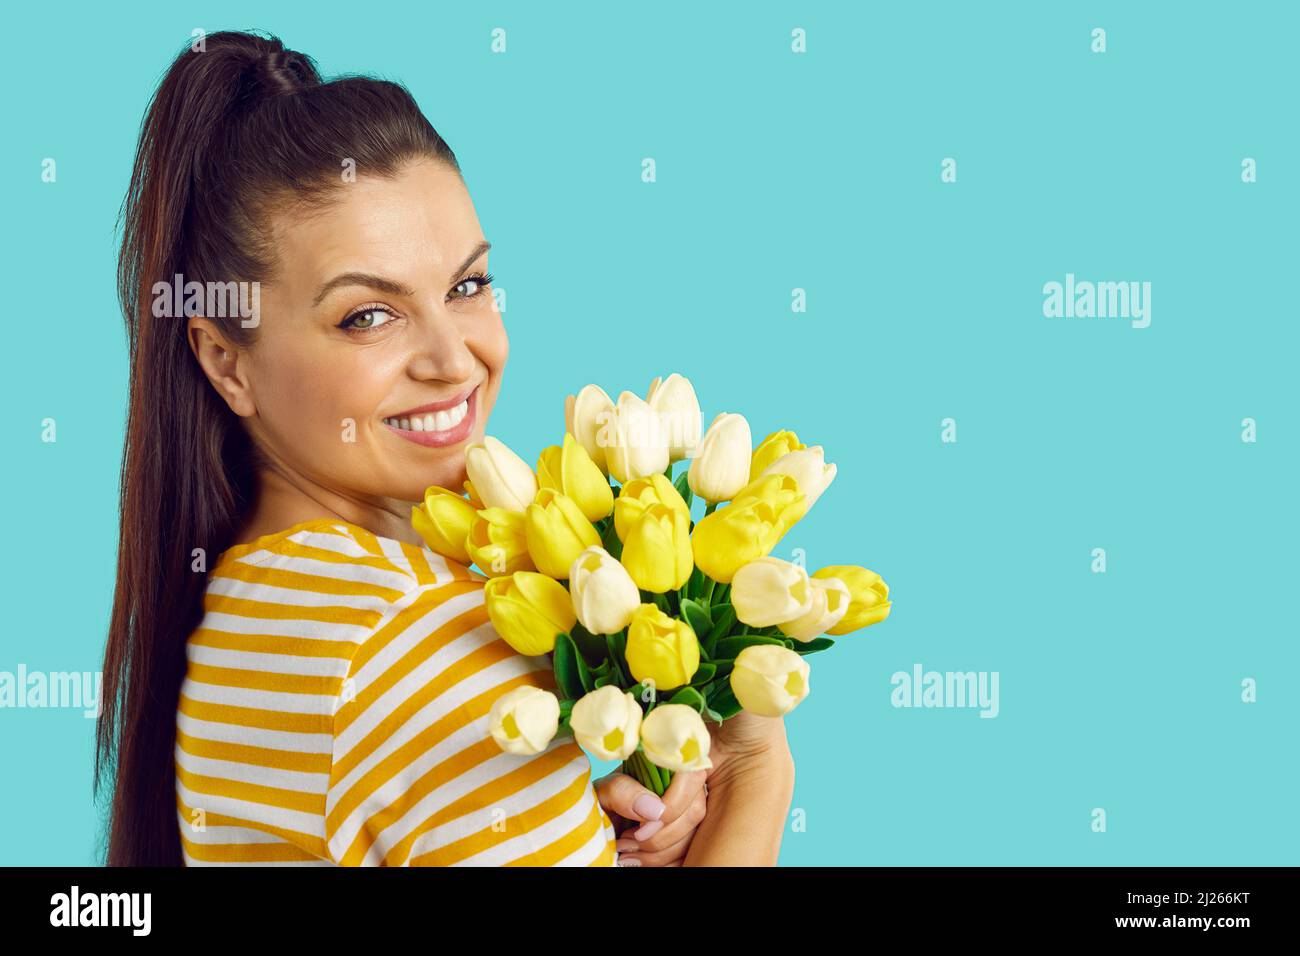 Portrait of a cheerful young woman with a bouquet of yellow tulips isolated on blue background. Cute girl smiling on blank wall background, copy space Stock Photo